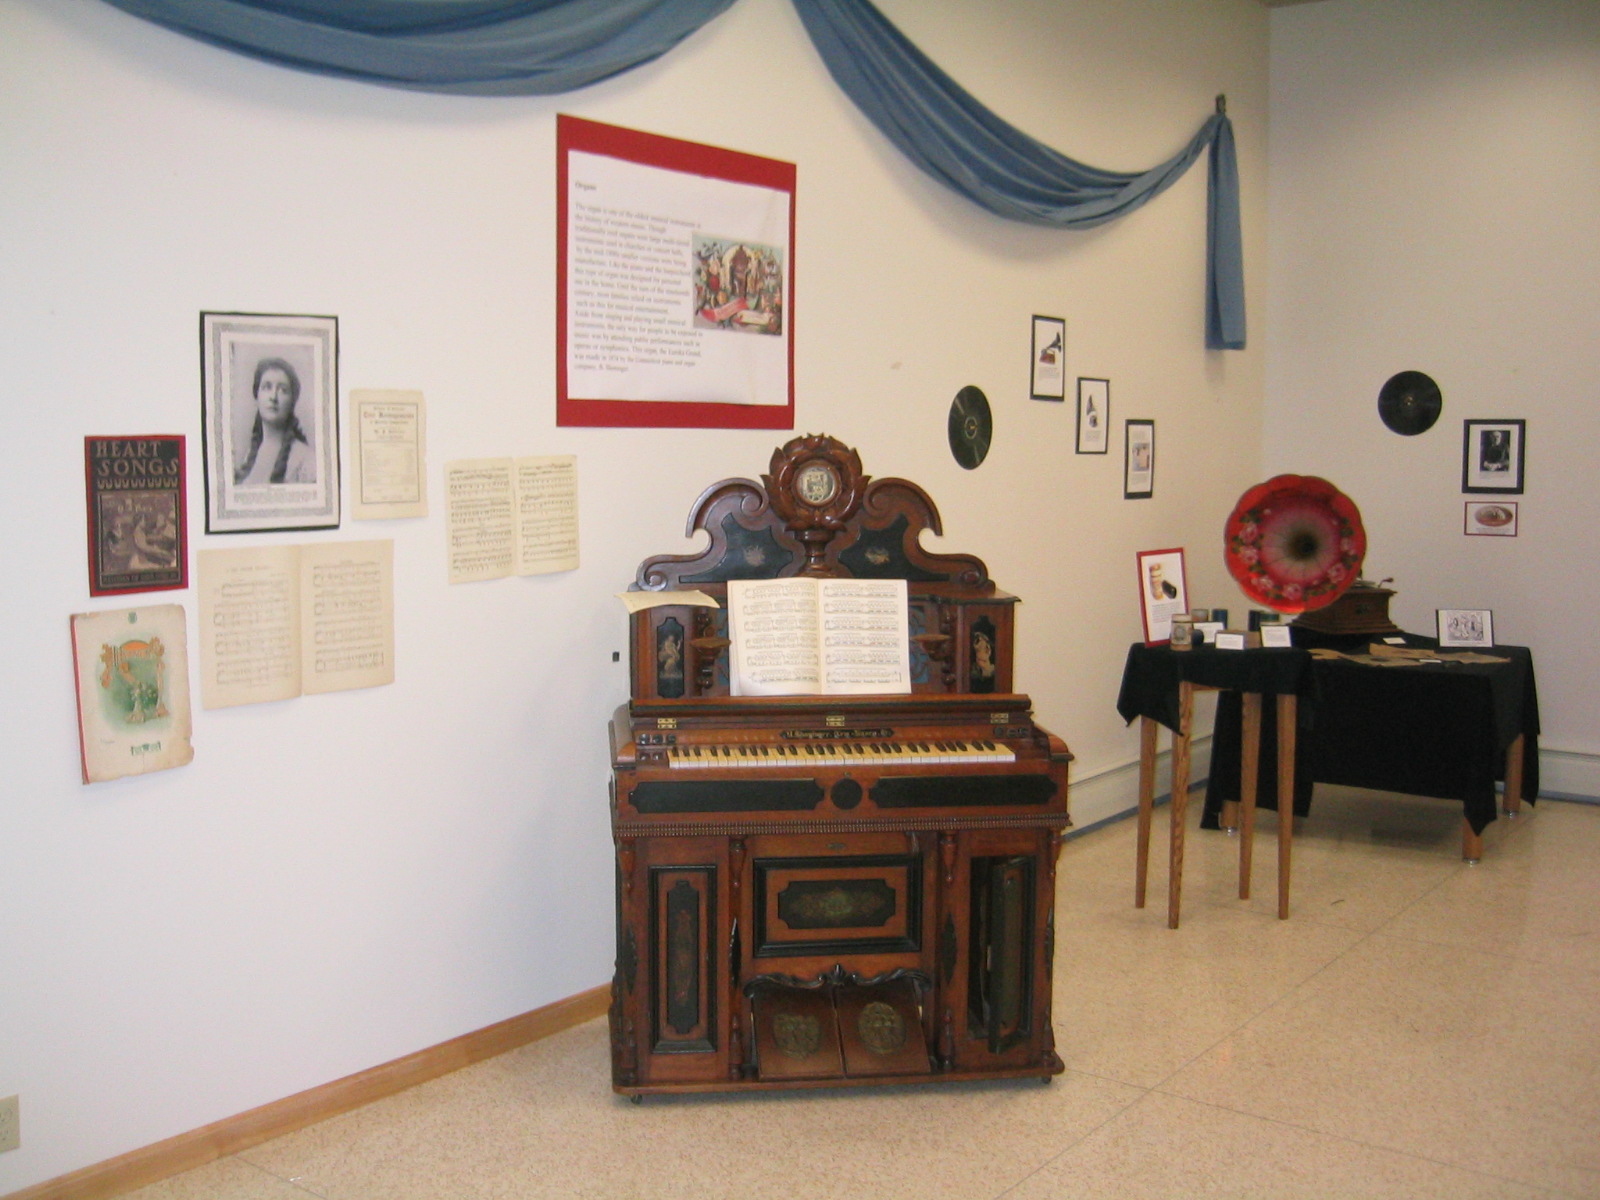 One of the first organs west of the Mississippi and an early, working Victrola. 